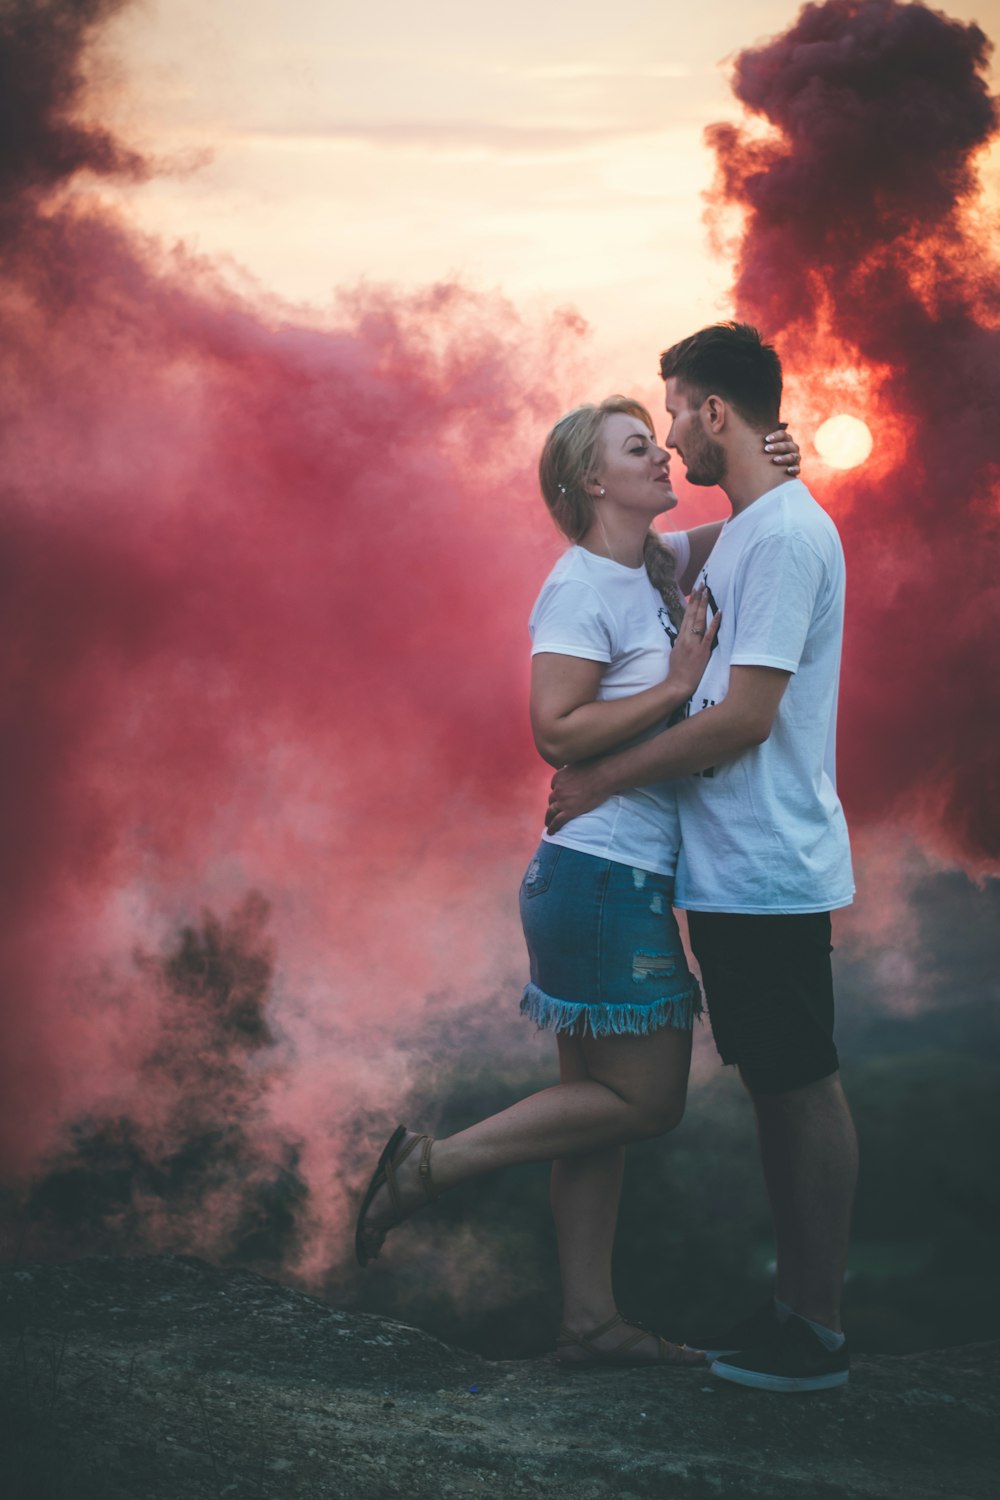 500+ Lovers Images | Download Free Pictures On Unsplash